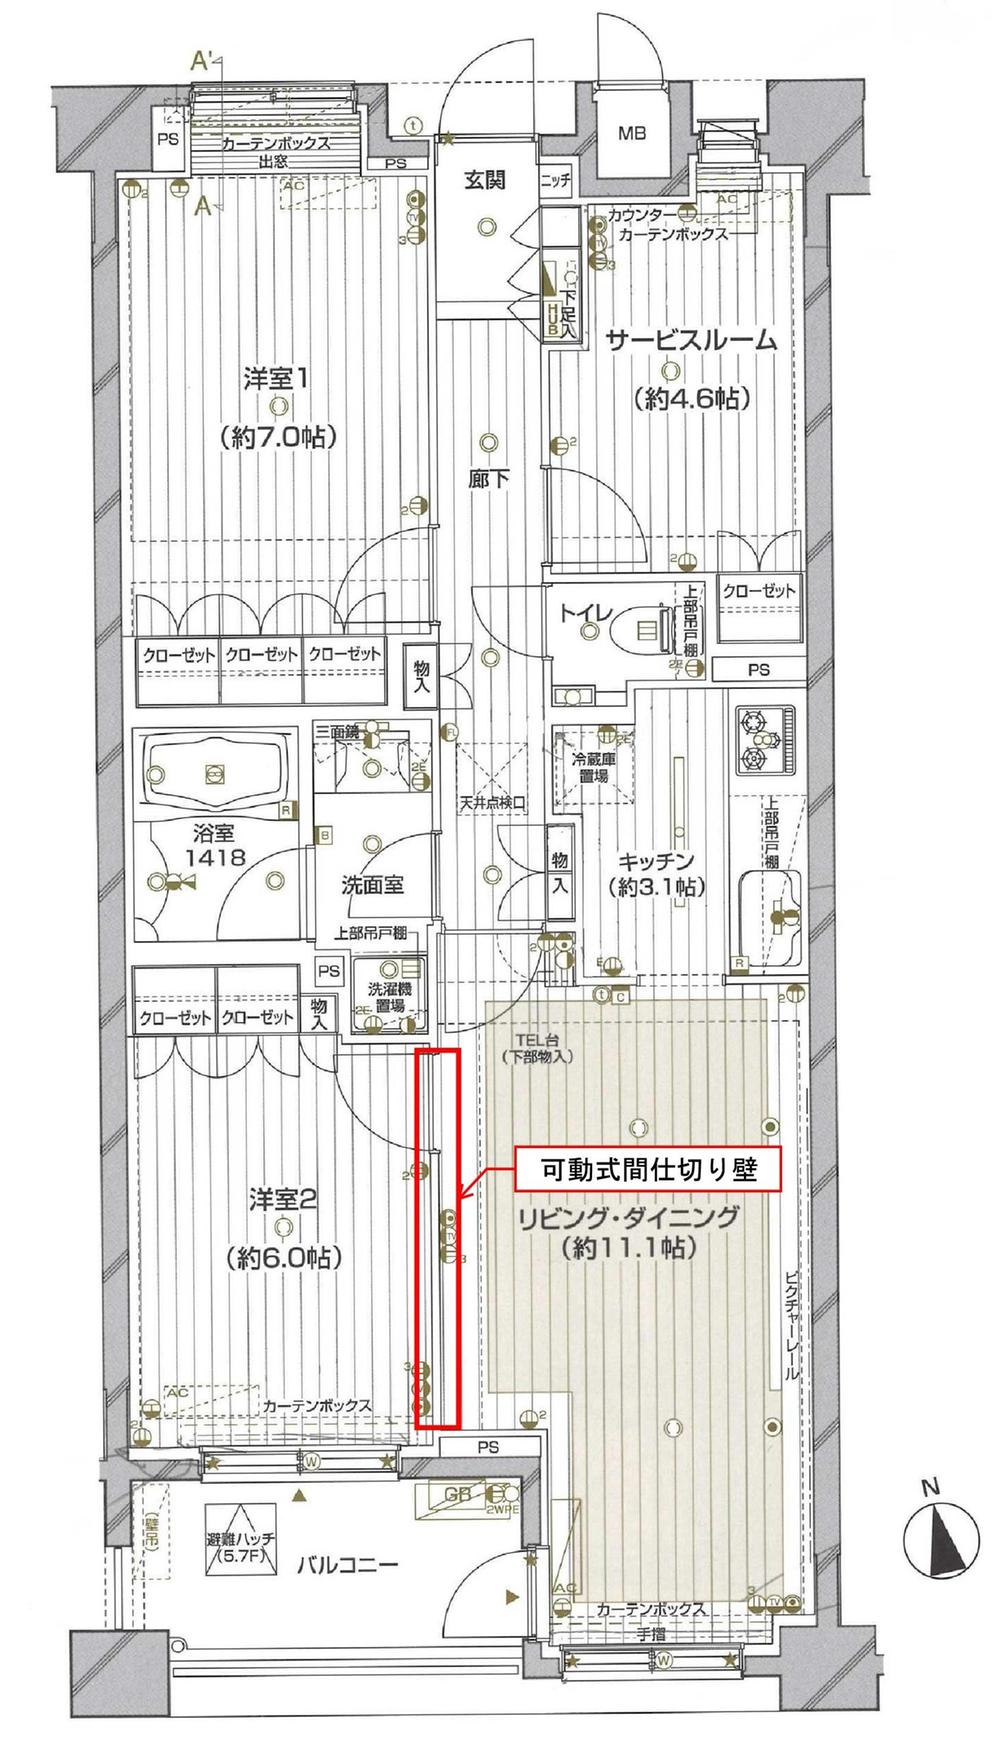 Floor plan. 2LDK + S (storeroom), Price 50,800,000 yen, Occupied area 70.56 sq m , Balcony area 5.95 sq m LDK and the adjacent Western-style room is has become a movable partition, Can you also 20 quires the LDK.